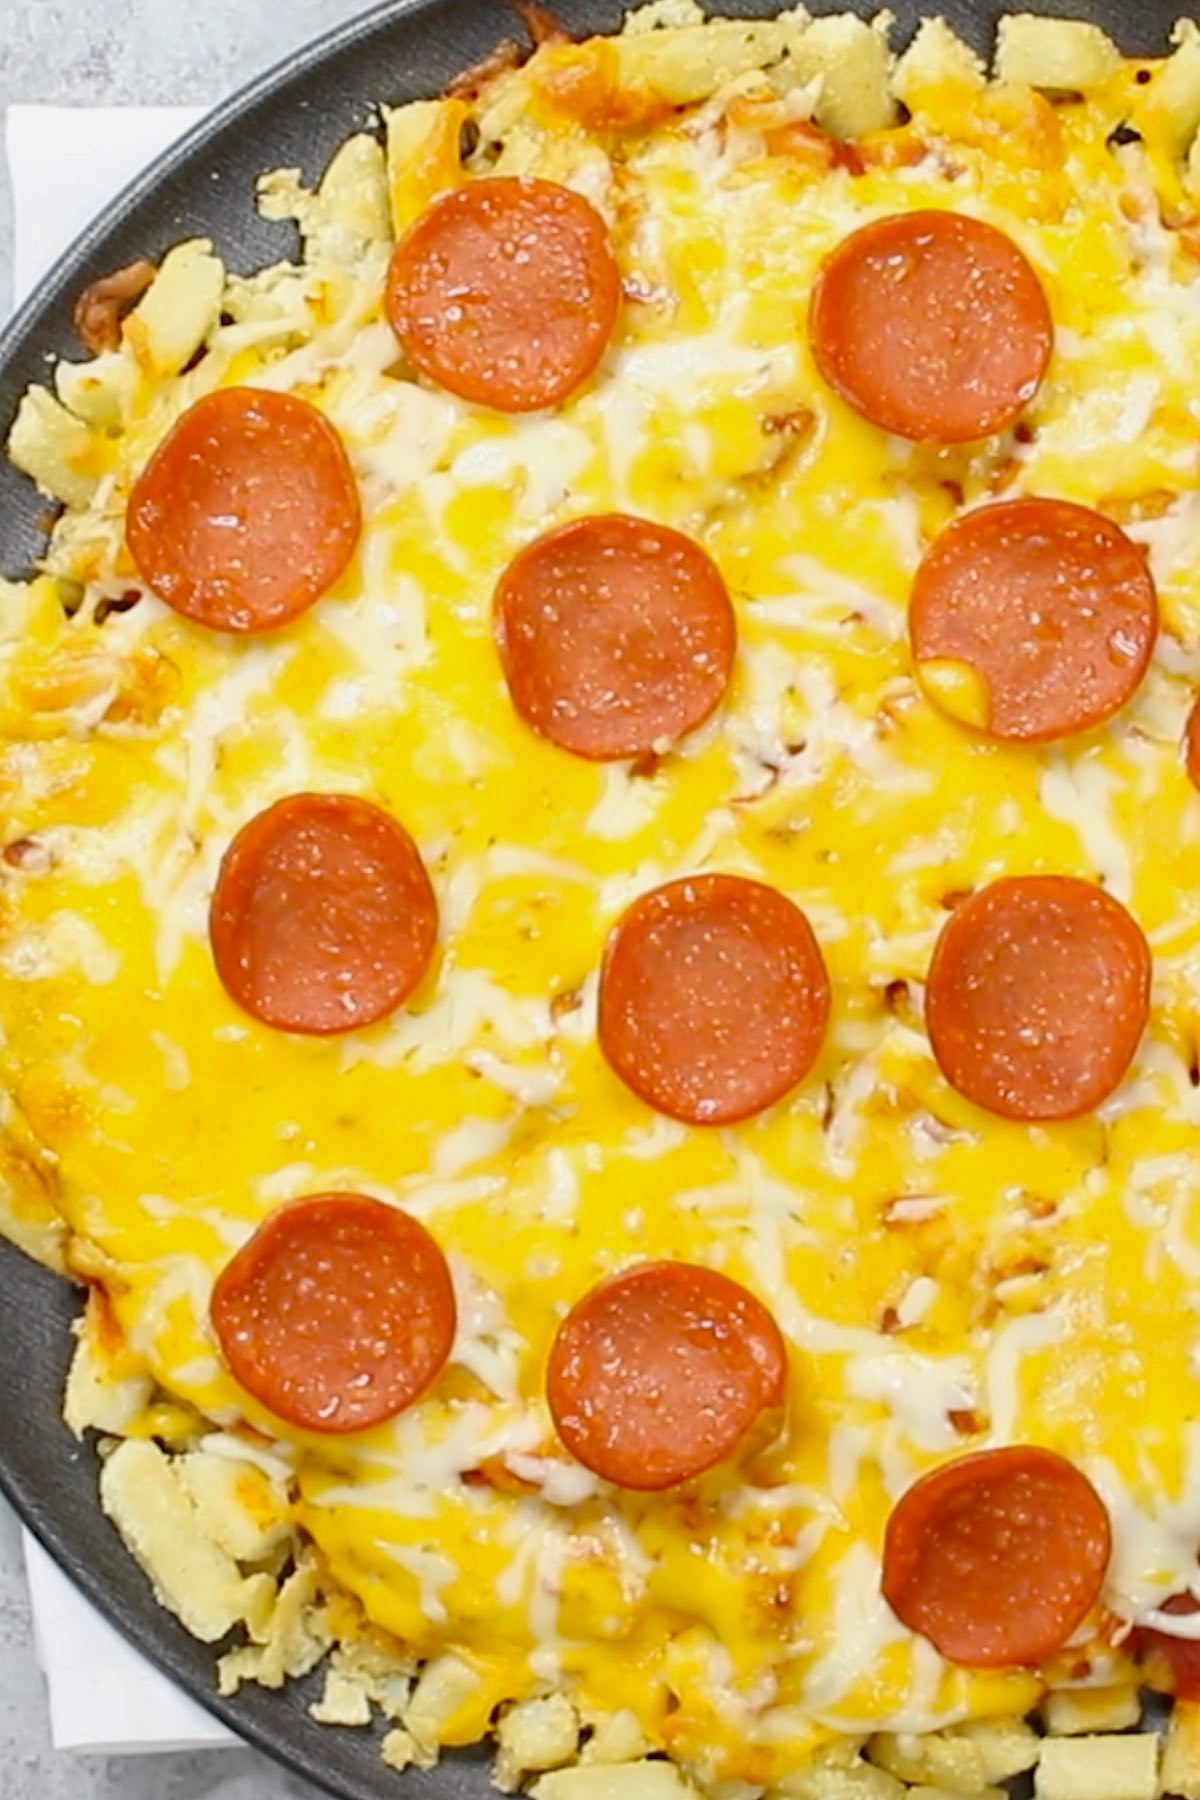 Pepperoni Pizza Fries are loaded with crispy French fry pizza crust and cheesy pepperoni toppings. This is a special pizza you’ve never had before! It’s so easy to make and you can use frozen, freshly cooked, or leftover French fries. Great for a game day party or any fun dinner parties.